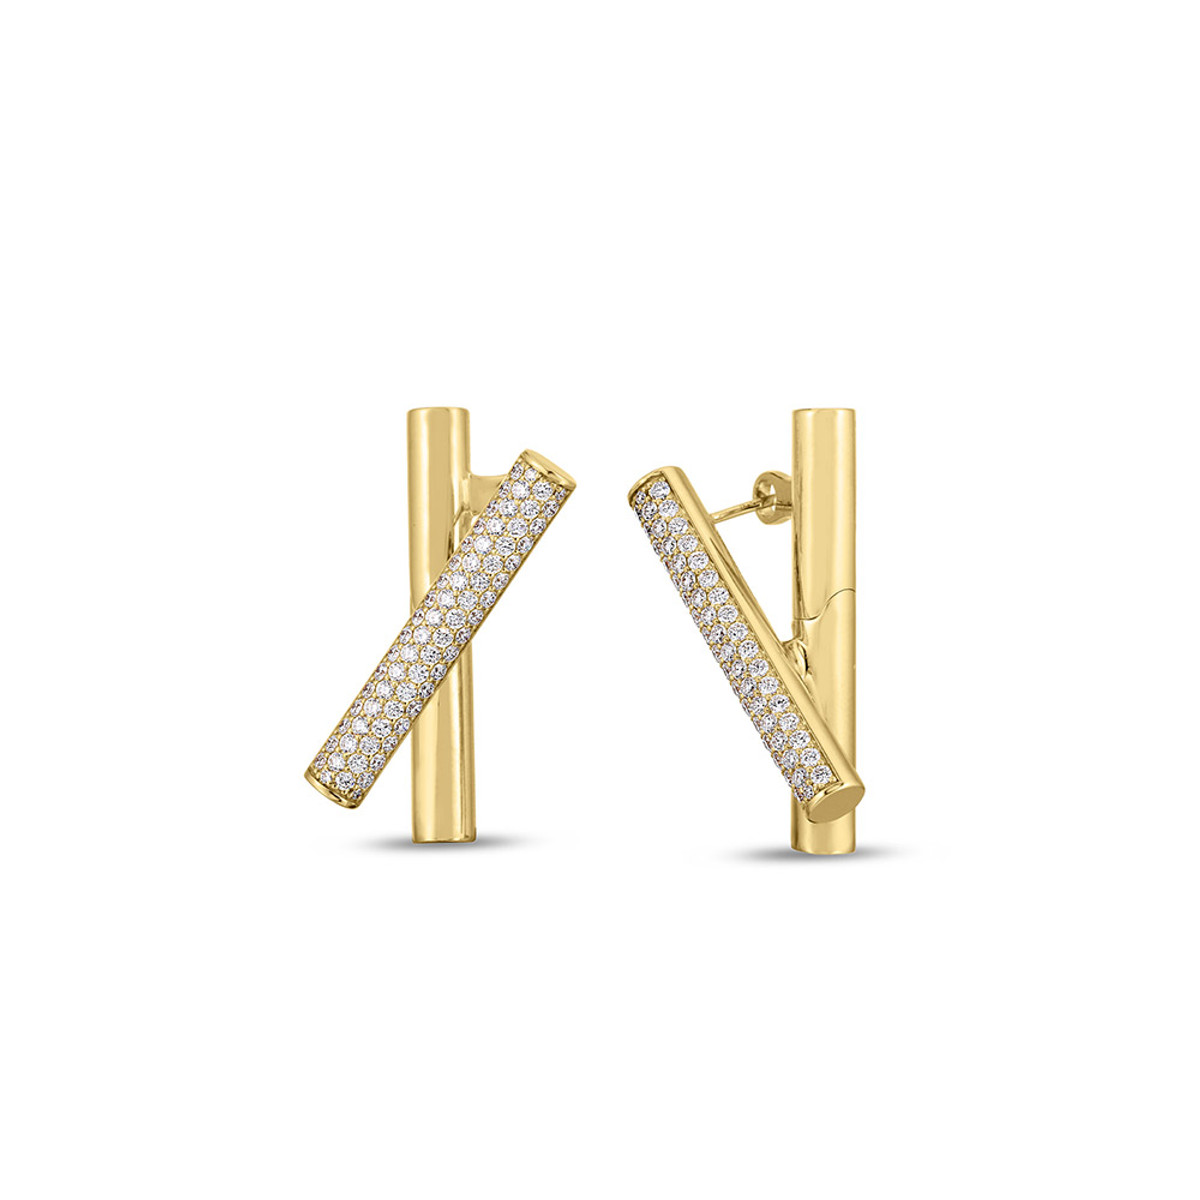 Roberto Coin 18K Yellow Gold Domino Diamond Crossover Earrings-57370 Product Image